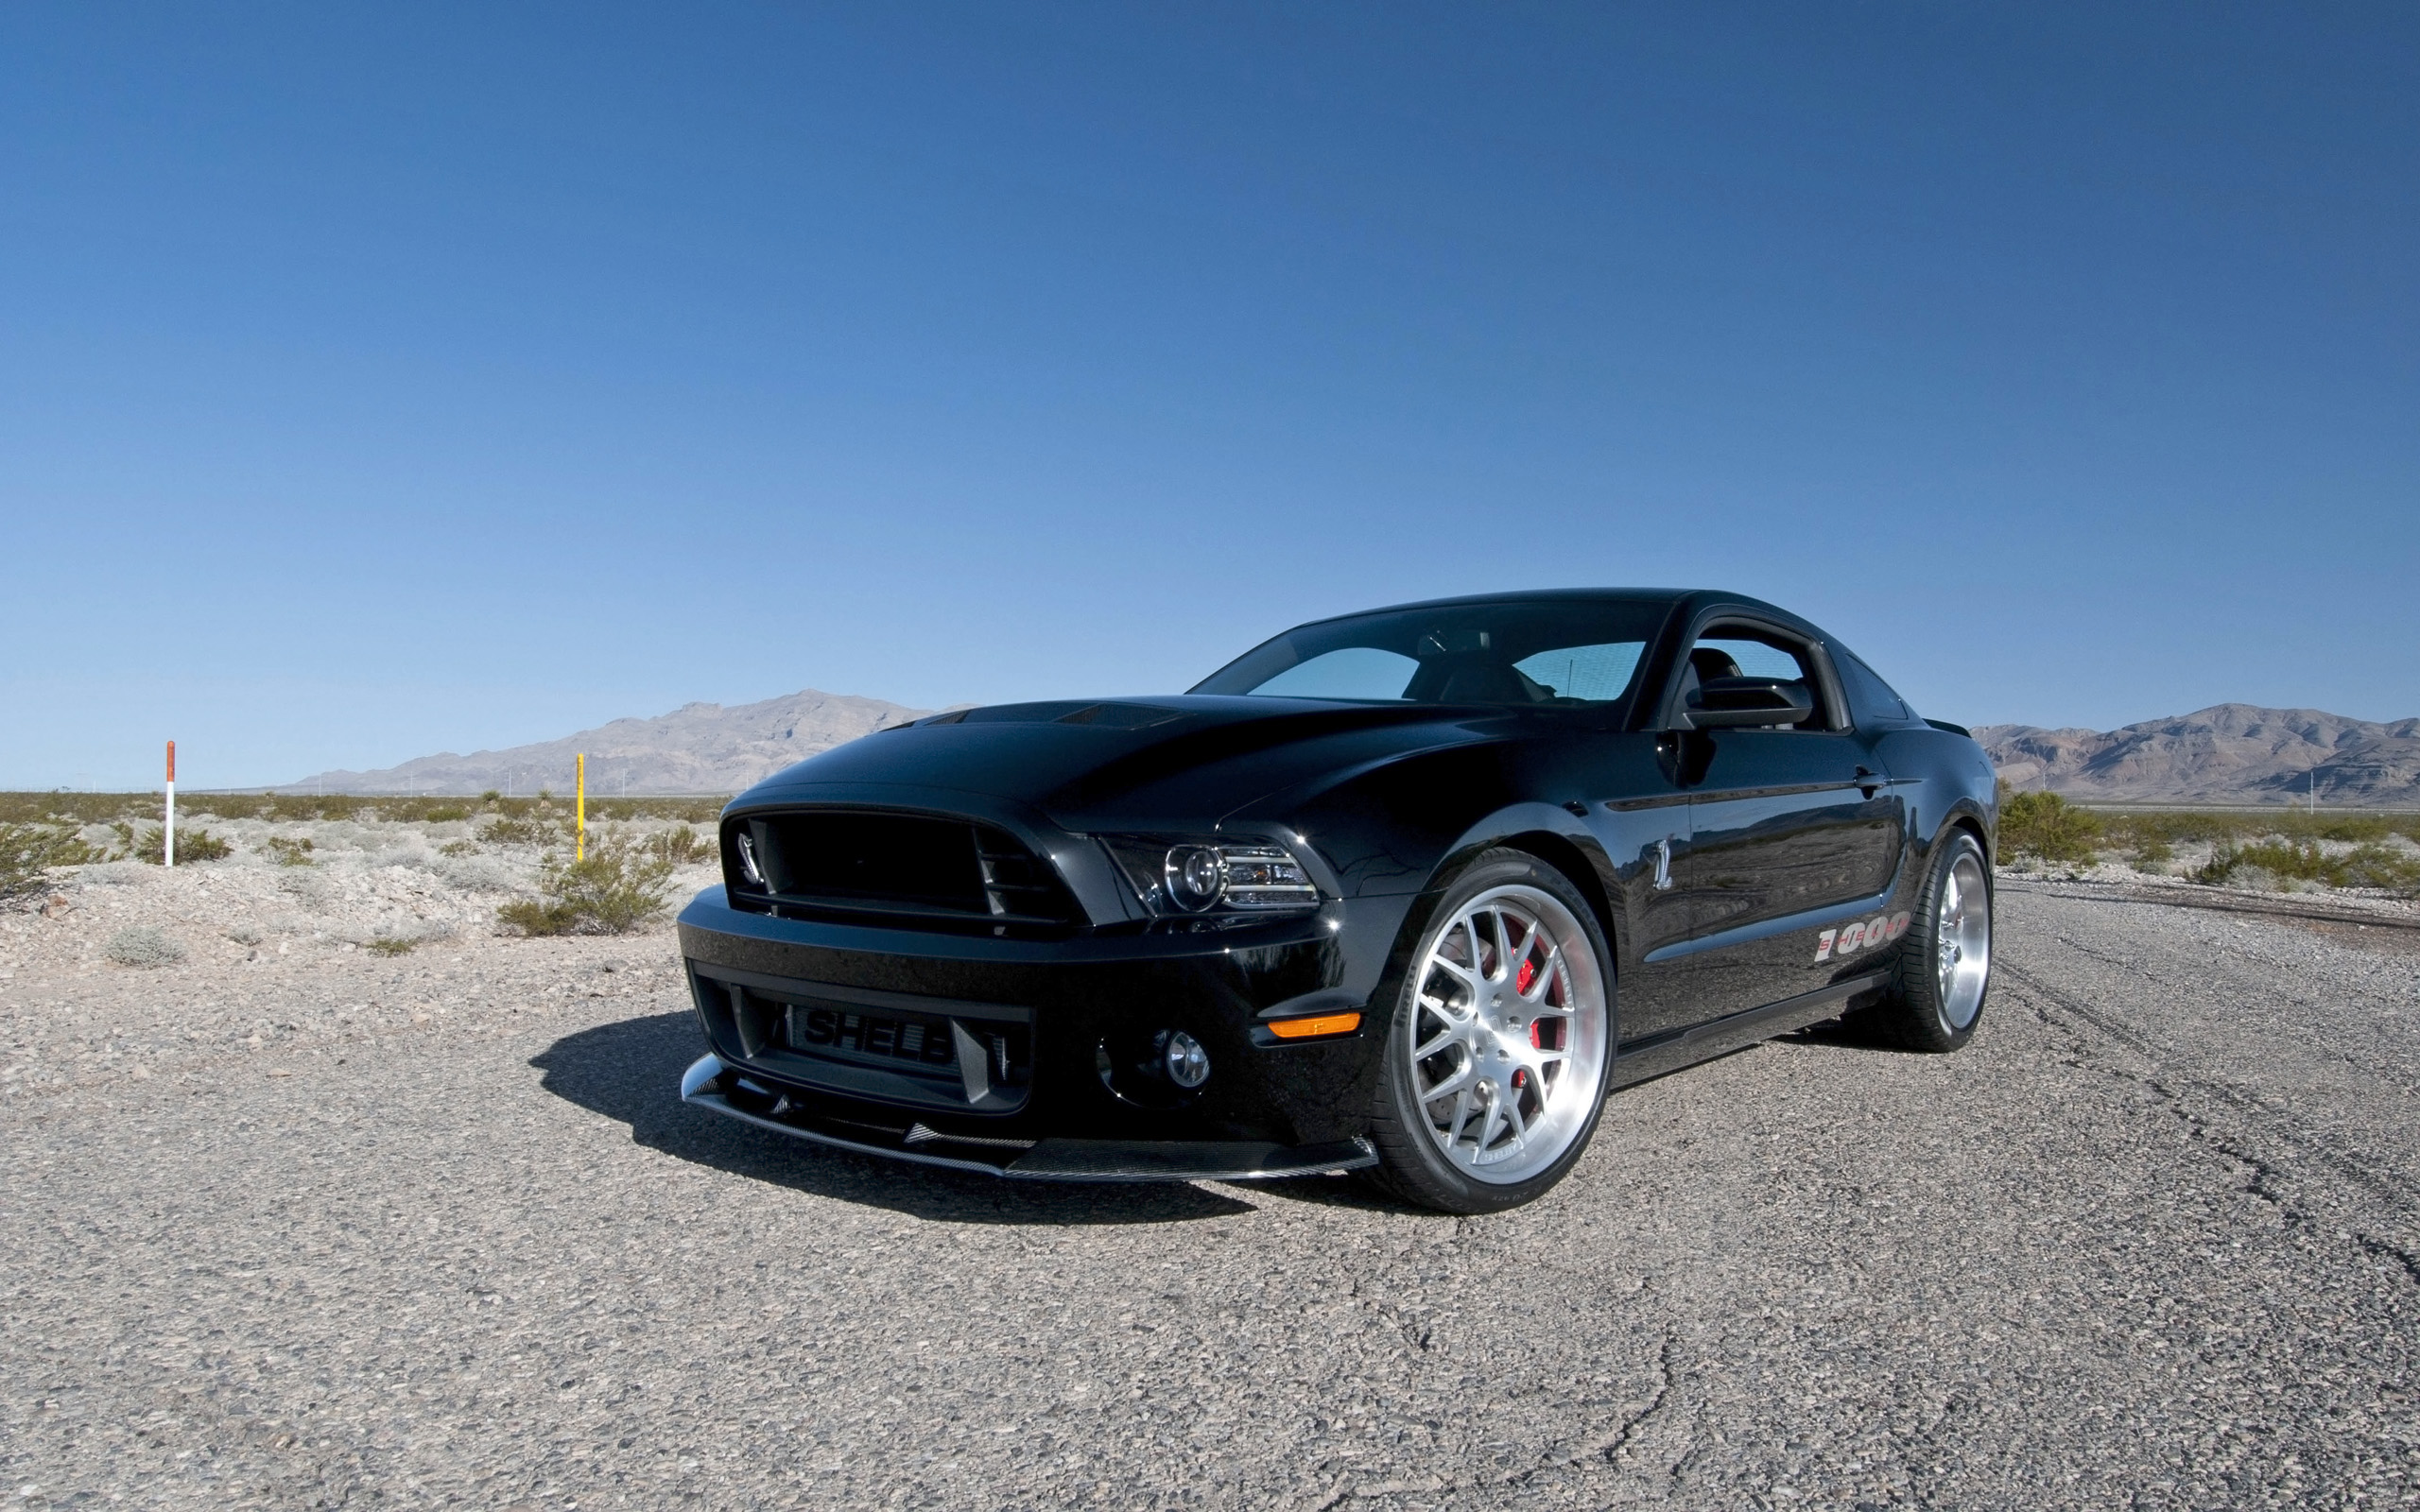 2013, Shelby, 1000, Ford, Mustang, Muscle, Supercar, Fw Wallpaper